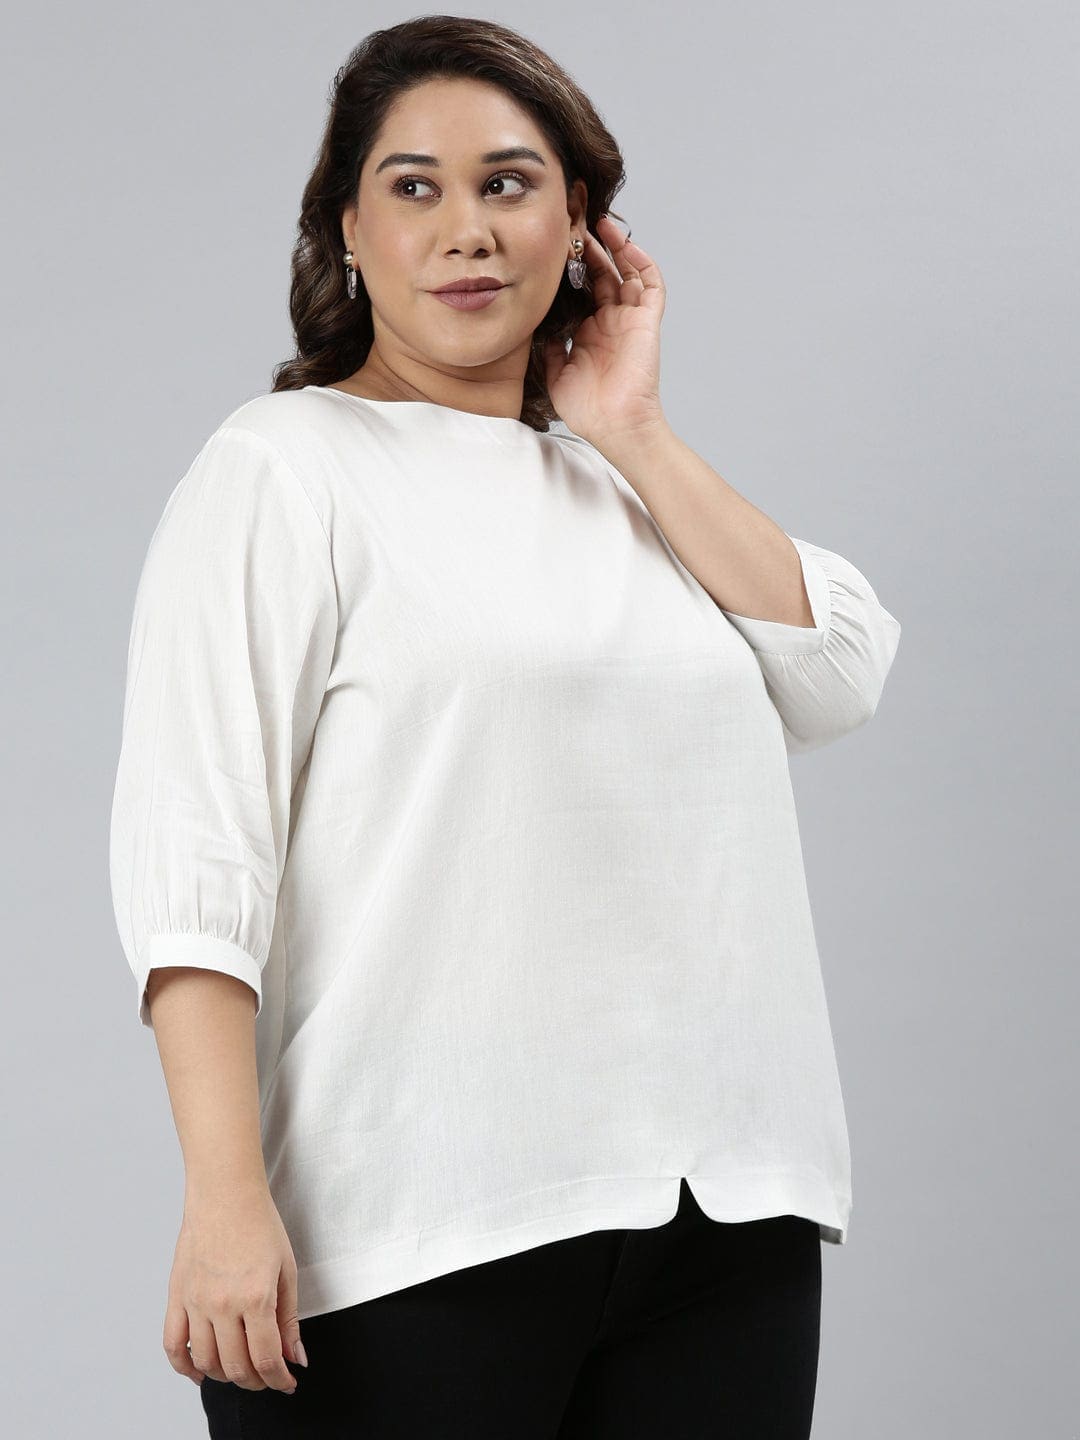 white cotton tops Affordable and Versatile elegant chic casual